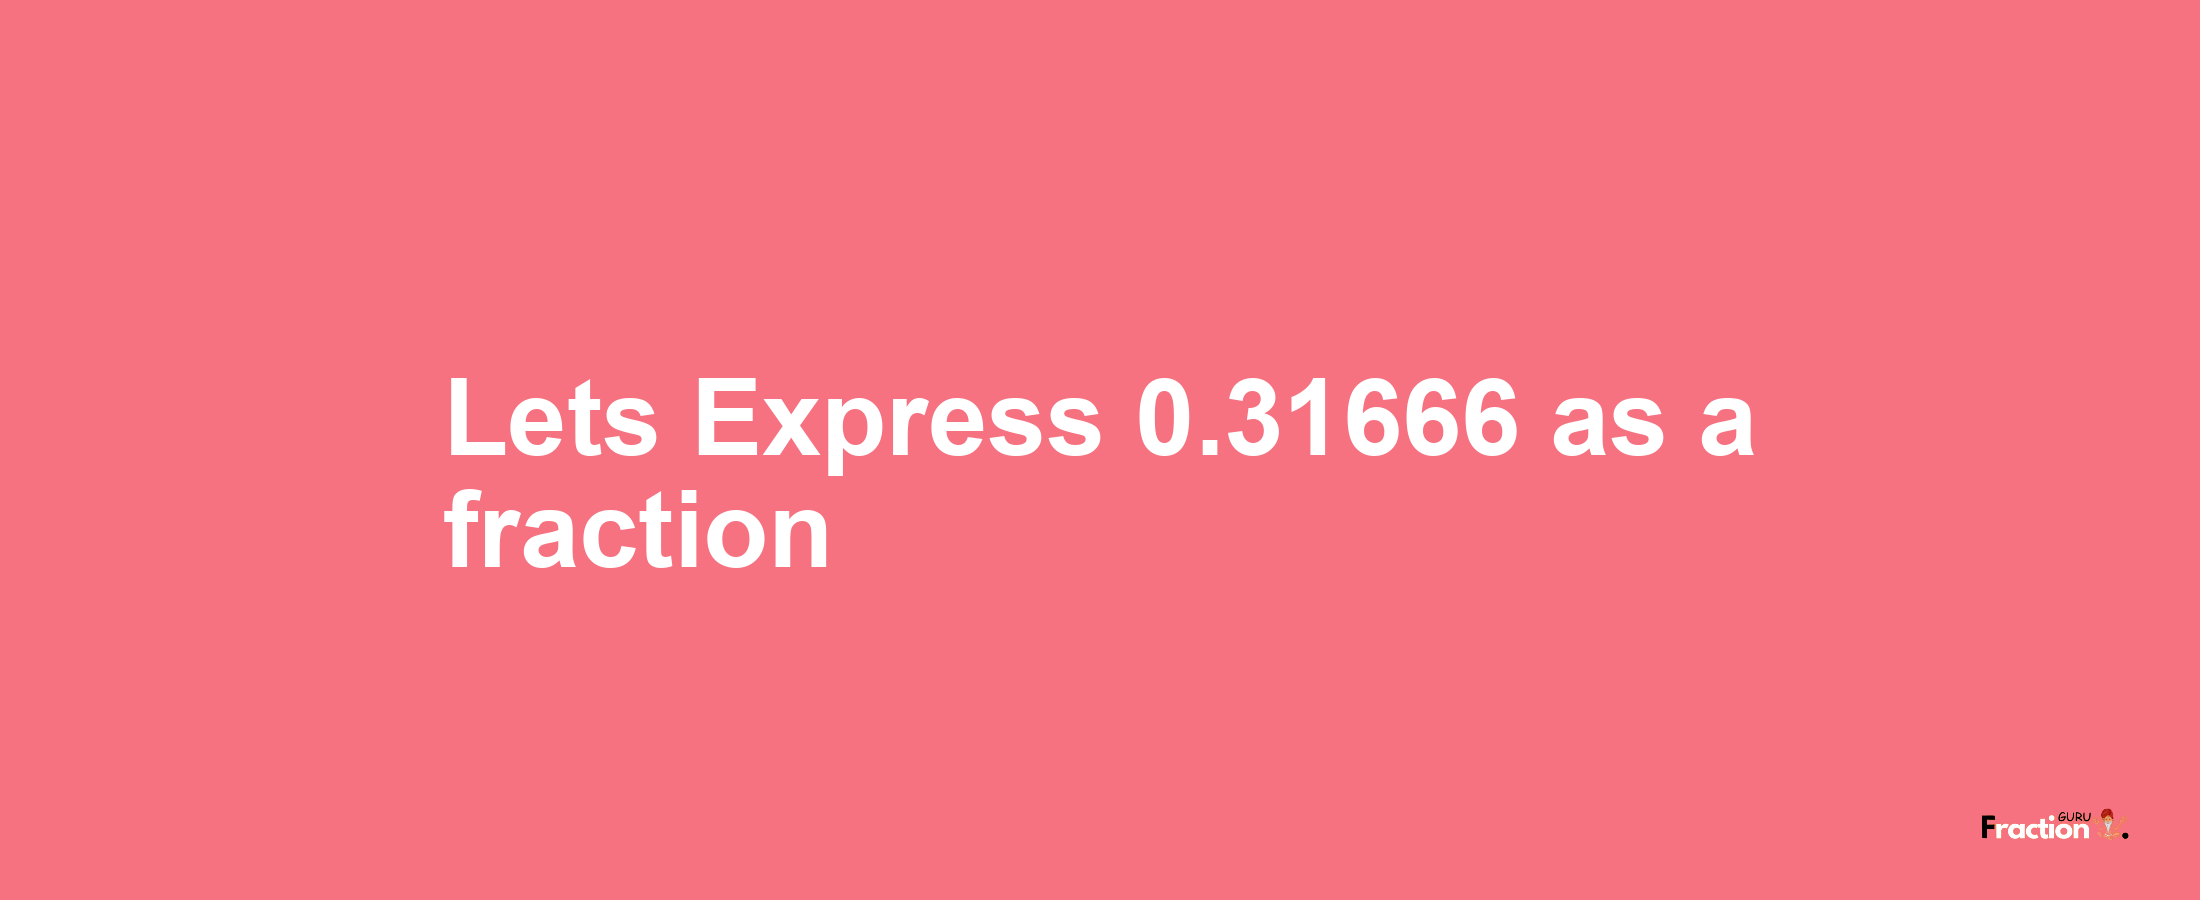 Lets Express 0.31666 as afraction